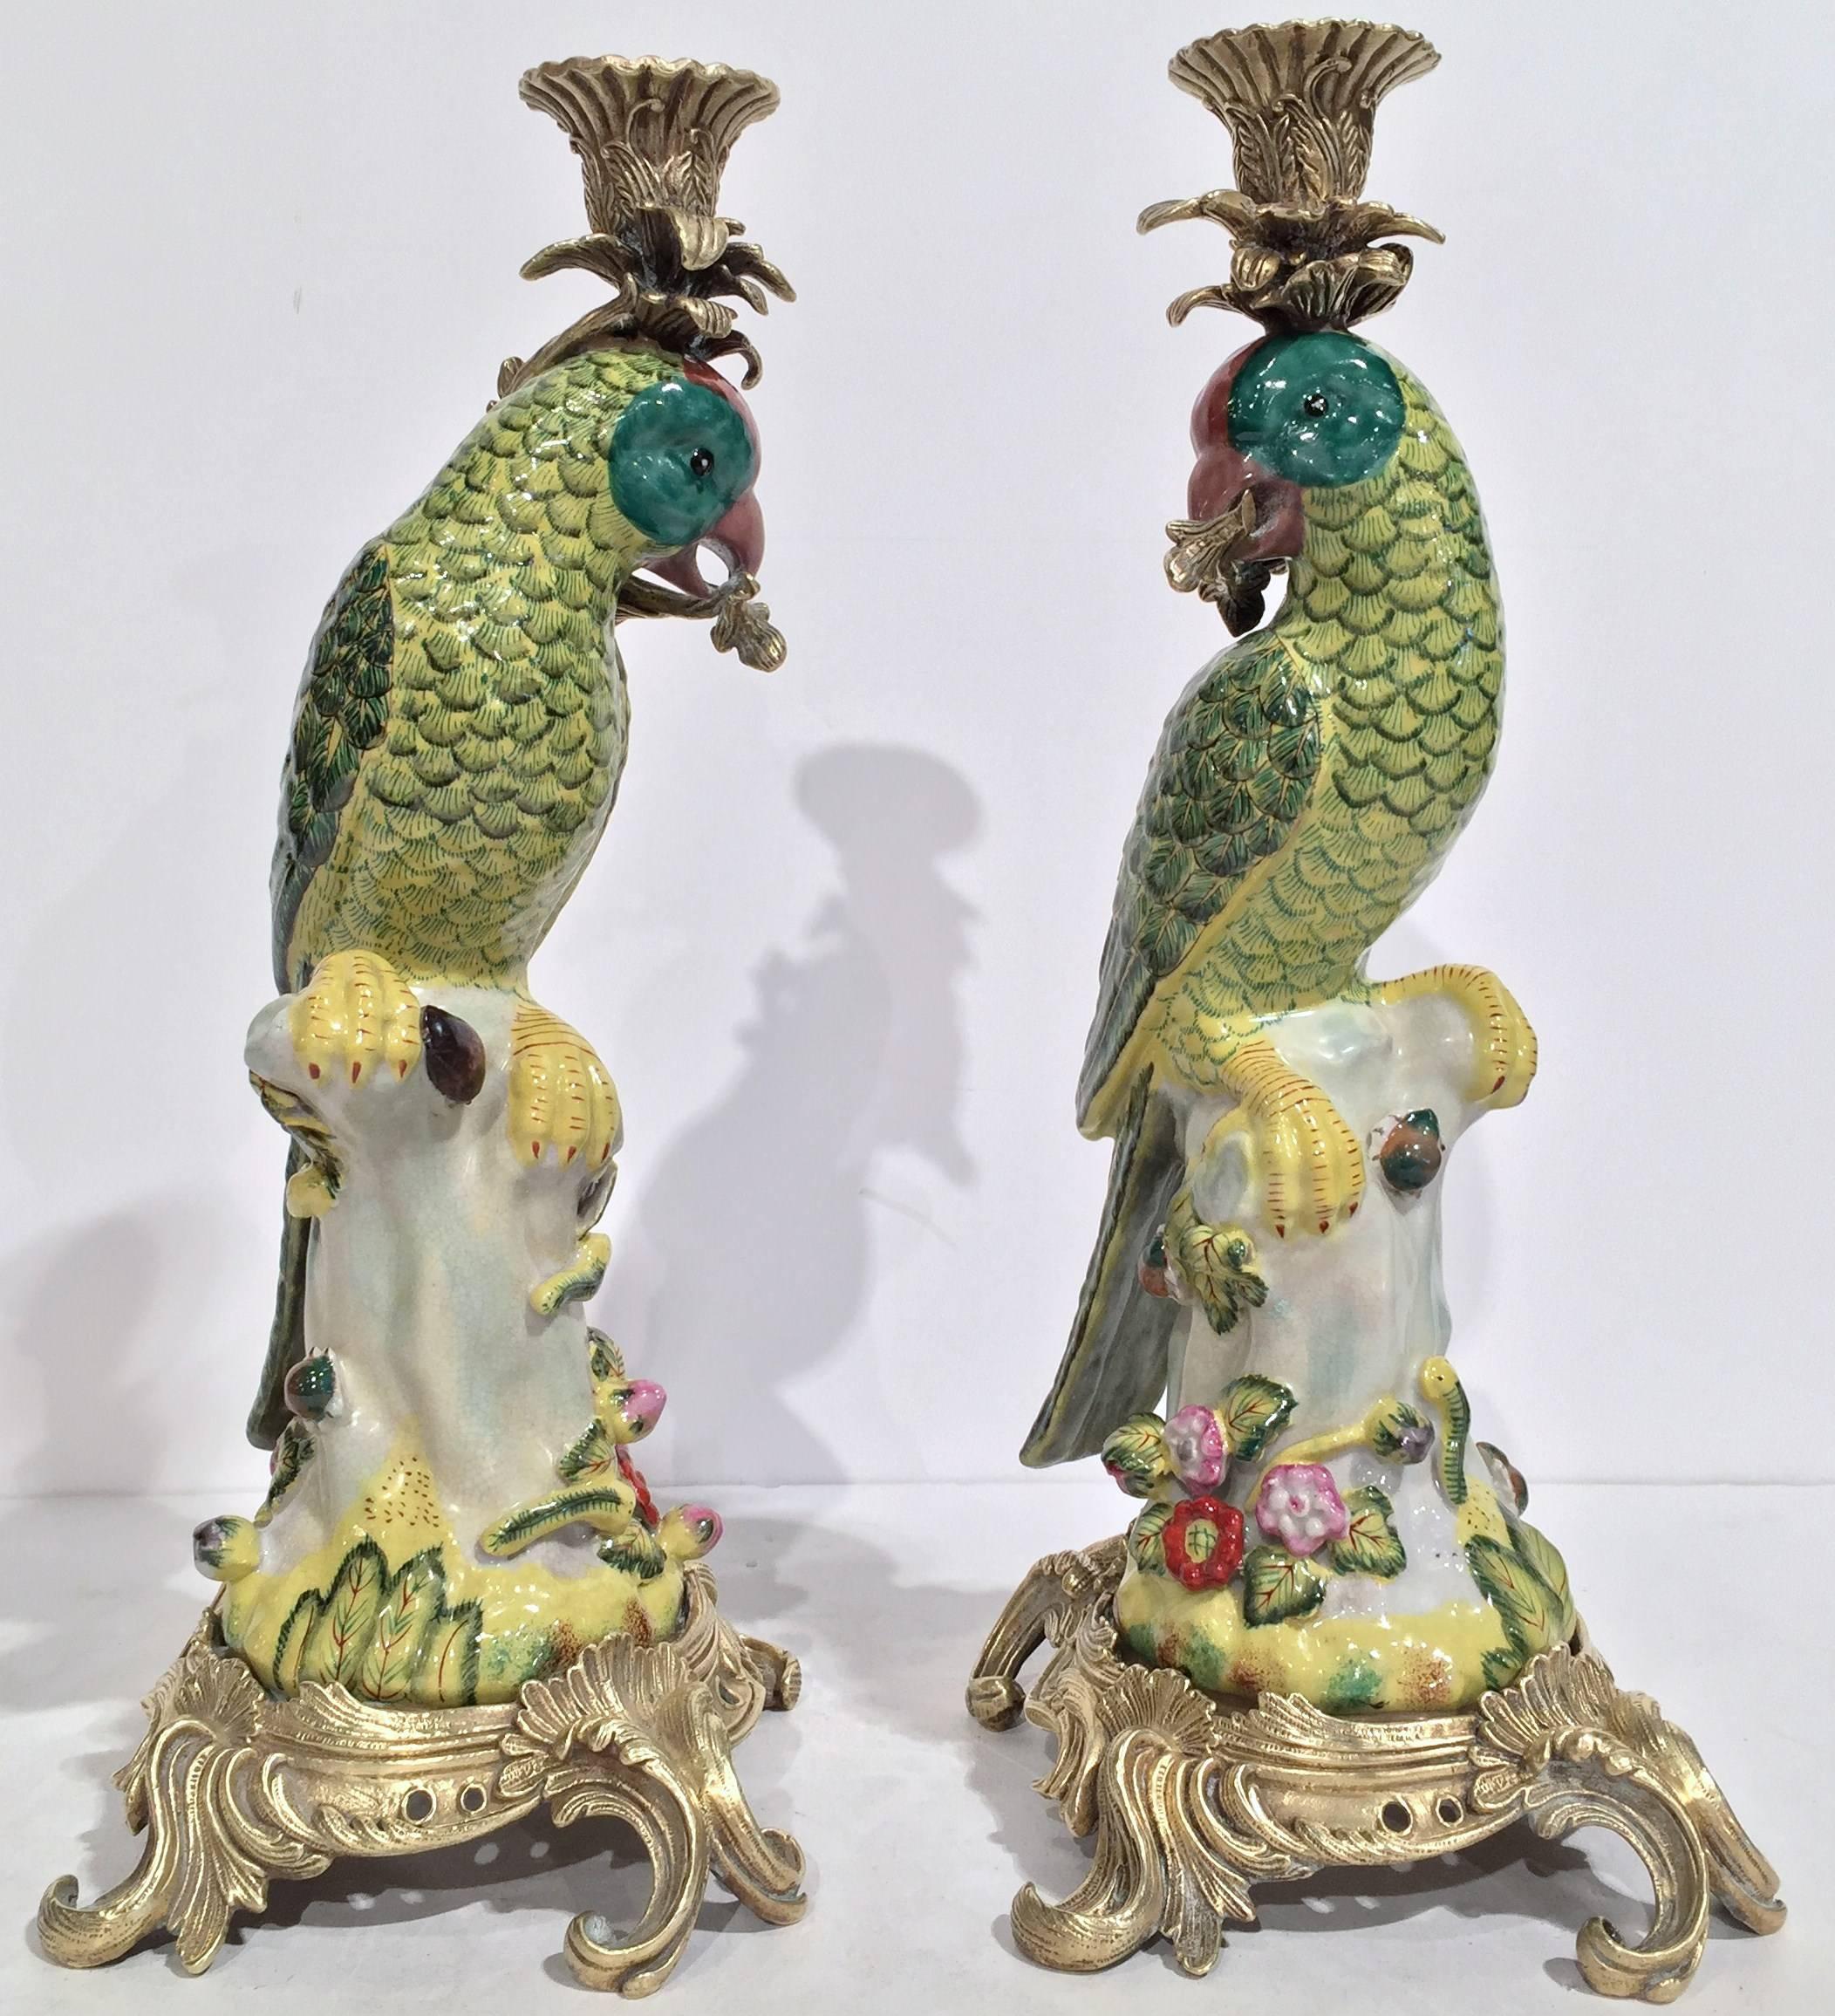 Pair of 19th century faience parrots candle holders on bronze bases (circa: 1870). Great colors, great condition!